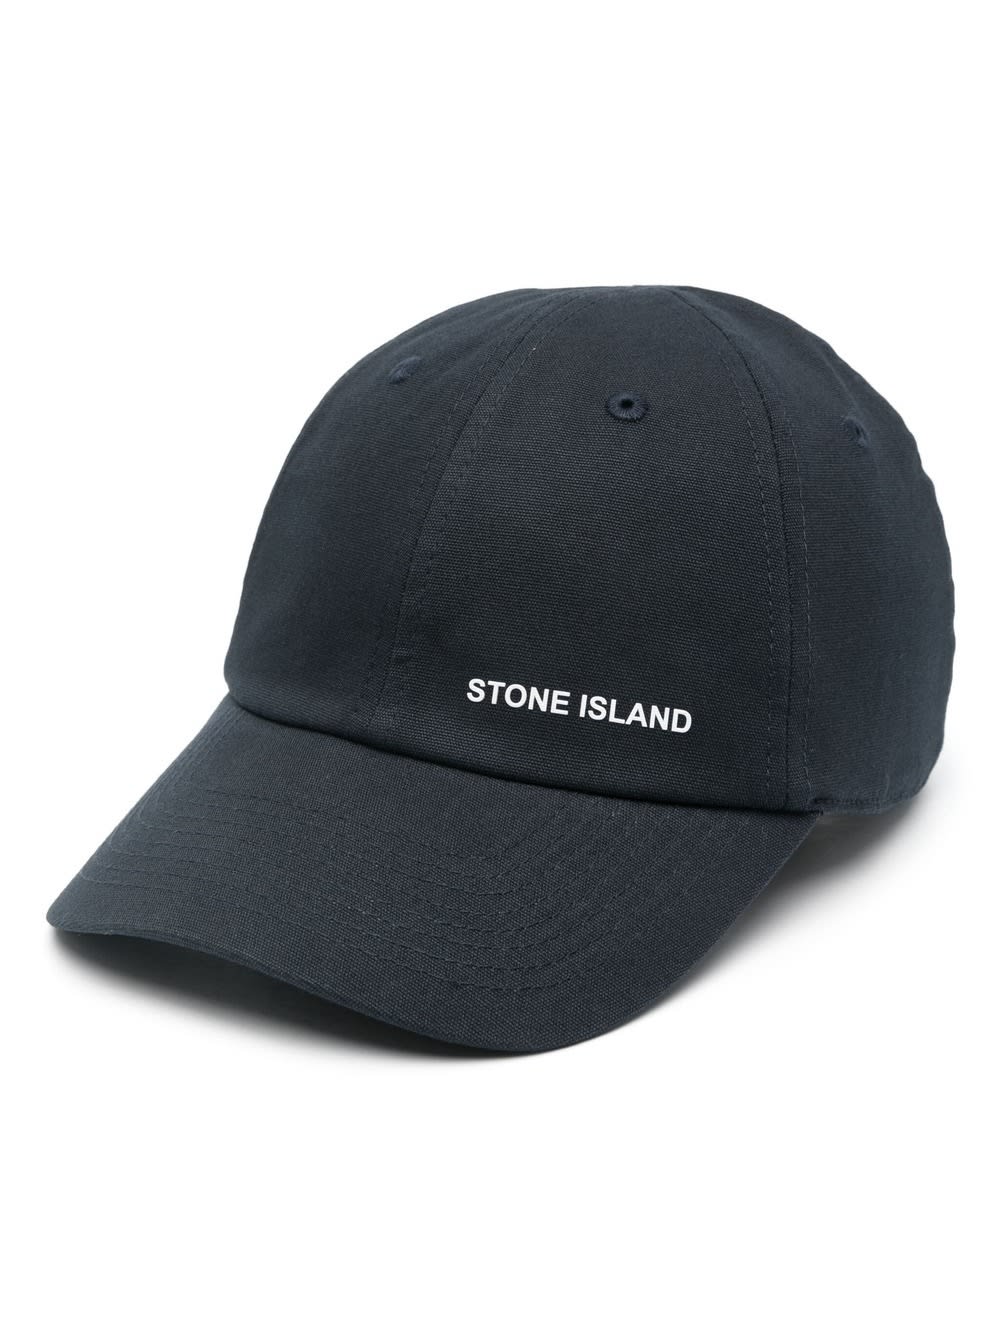 Stone Island Navy Blue Baseball Hat With Embossed Print